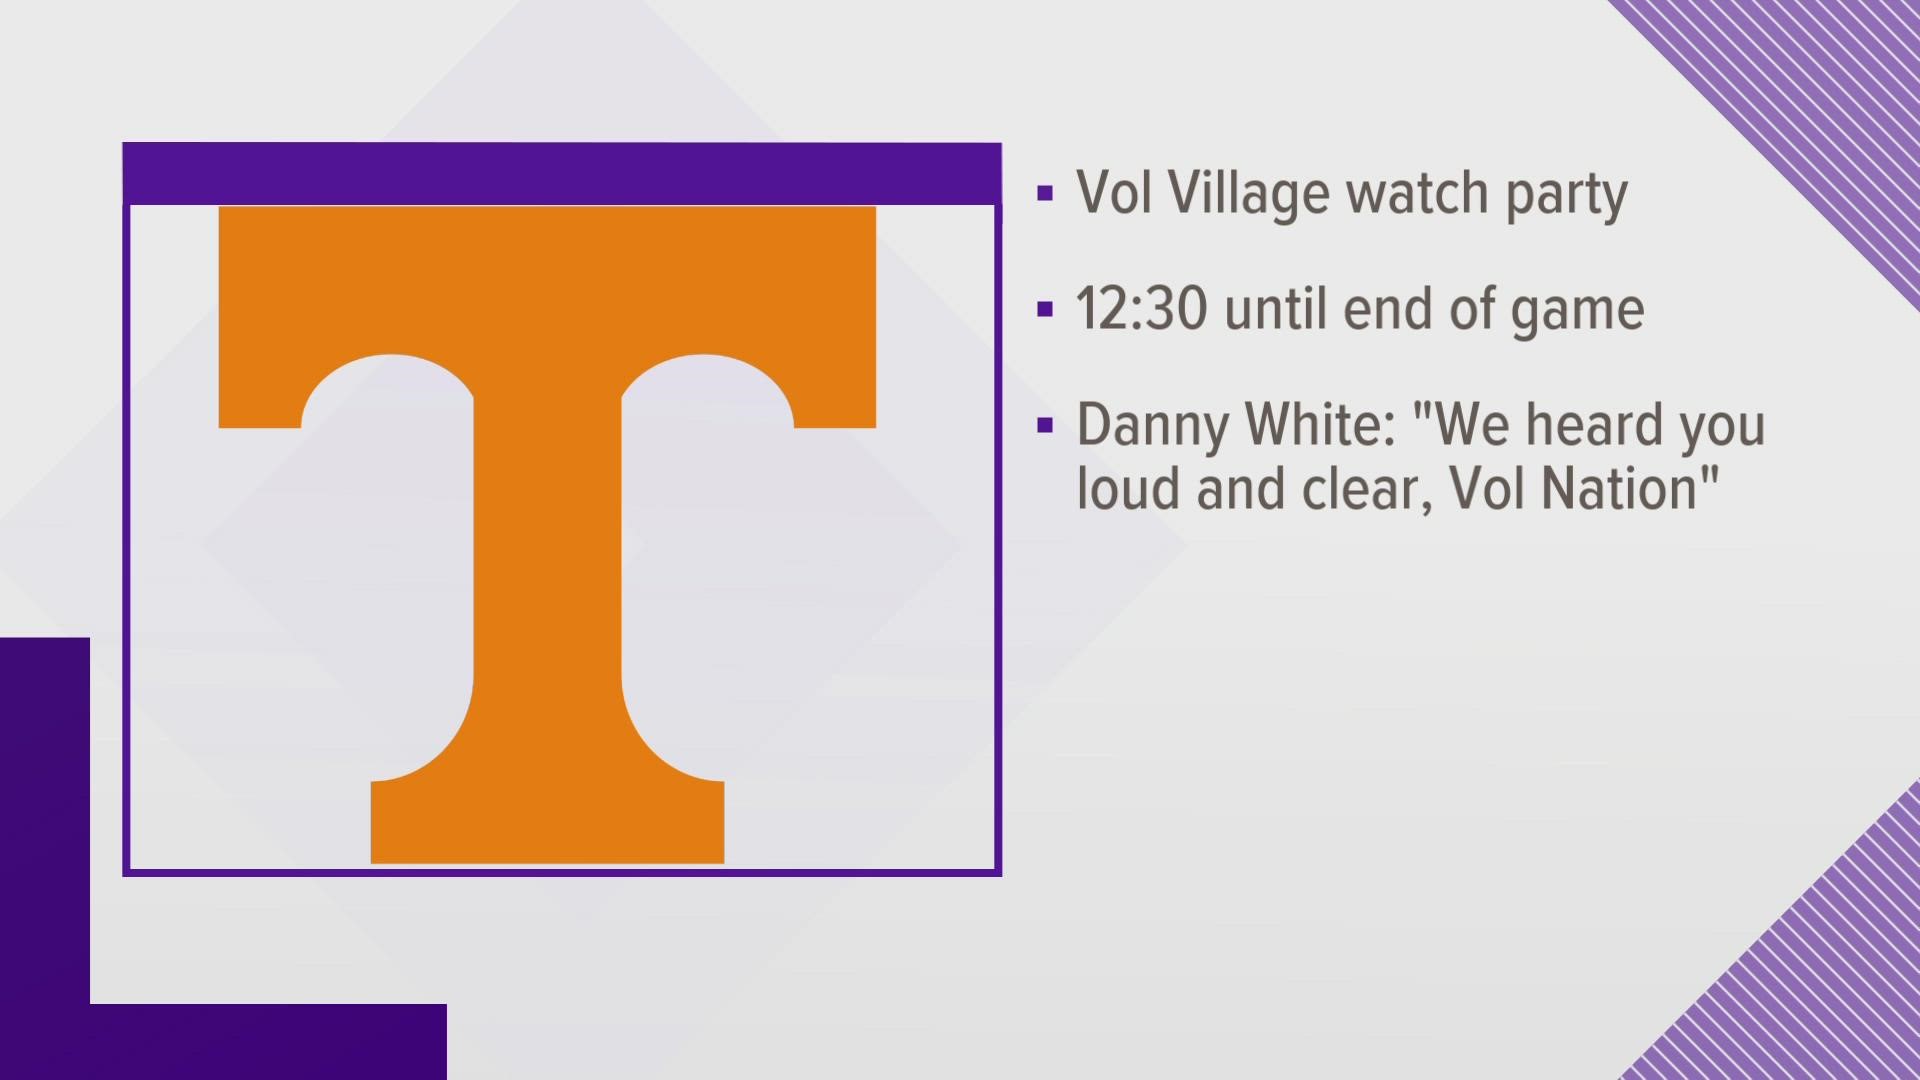 The Vols will host a public watch party for people who can't get a ticket this weekend. They'll be showing the game in Vol Village at 12:30 p.m.